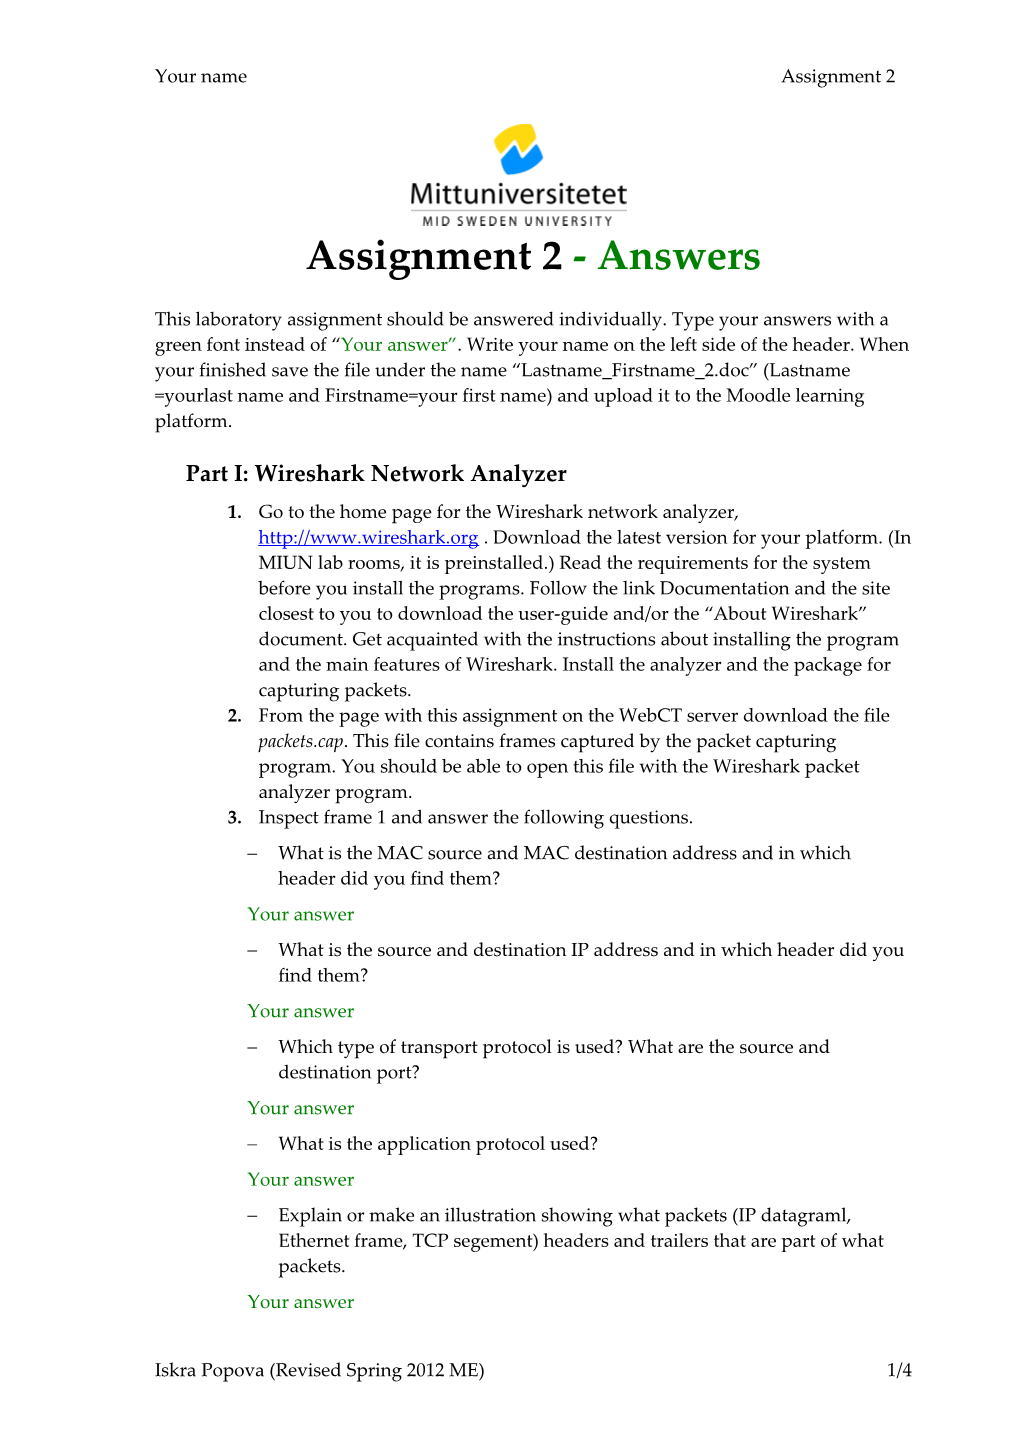 Assignment 2 - Answers